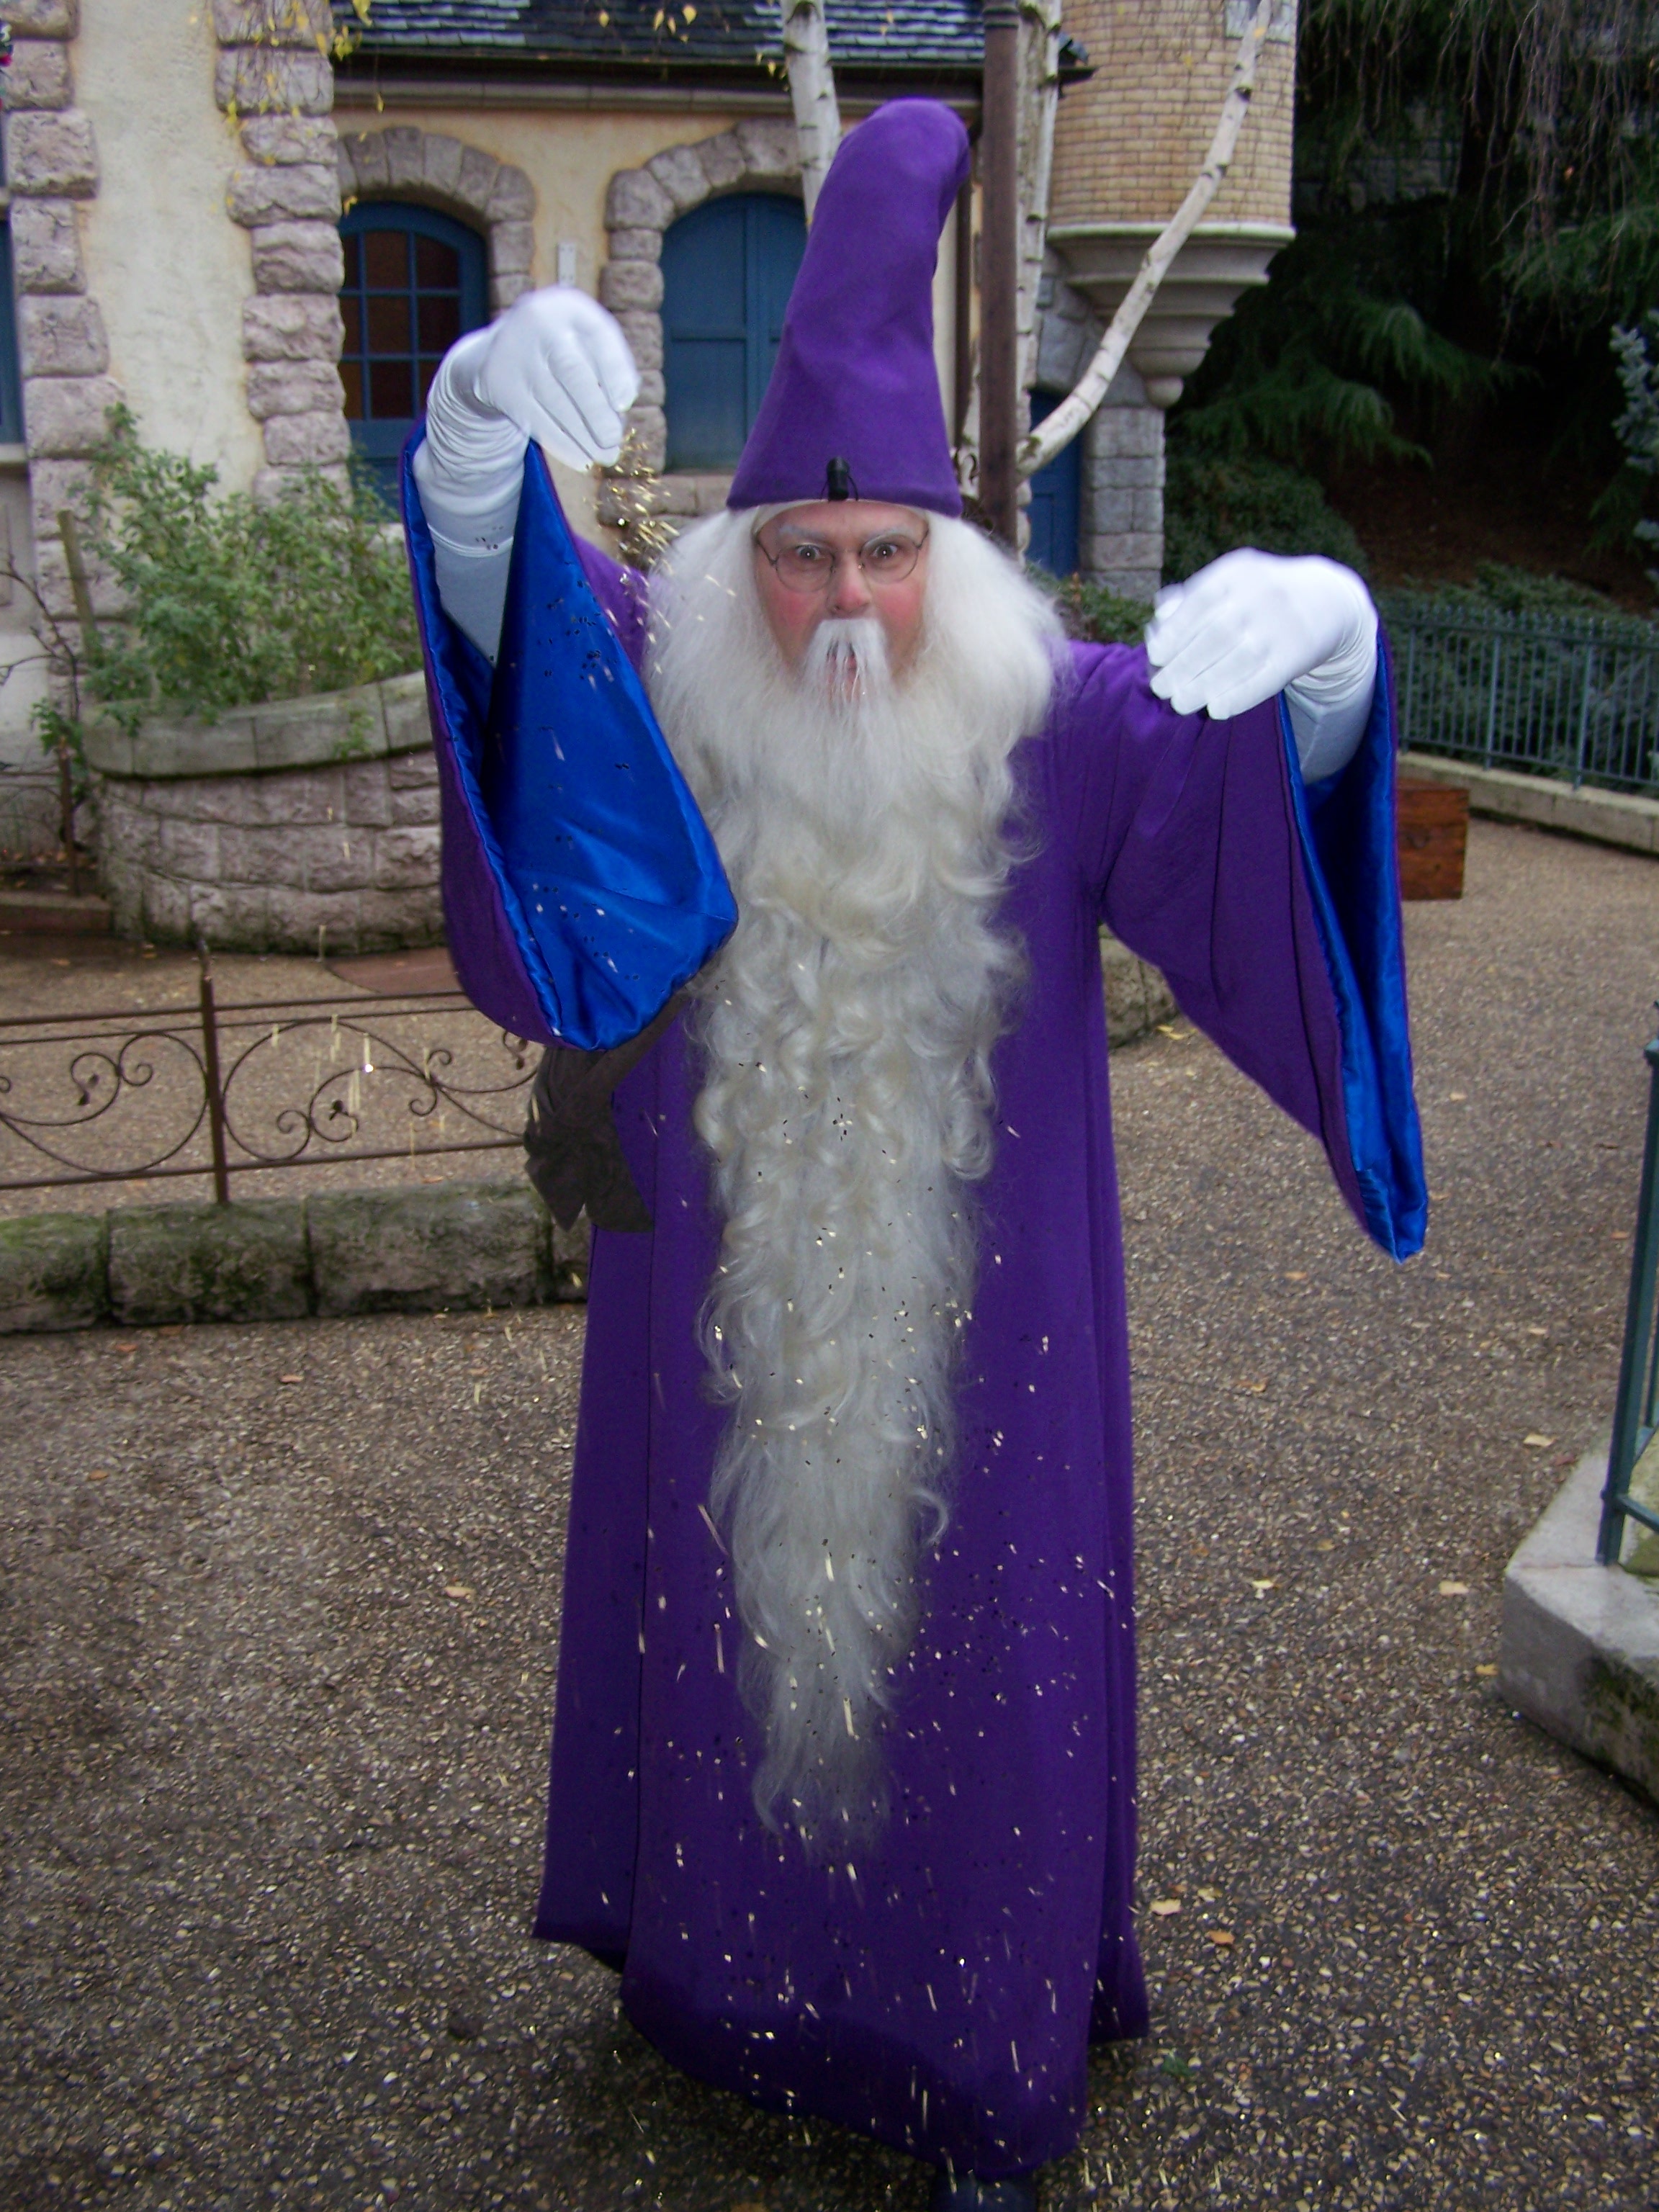 Merlin can be found in the Parade nowadays. He used to have a small show in Fantasyland and afterwards people were able to meet him.